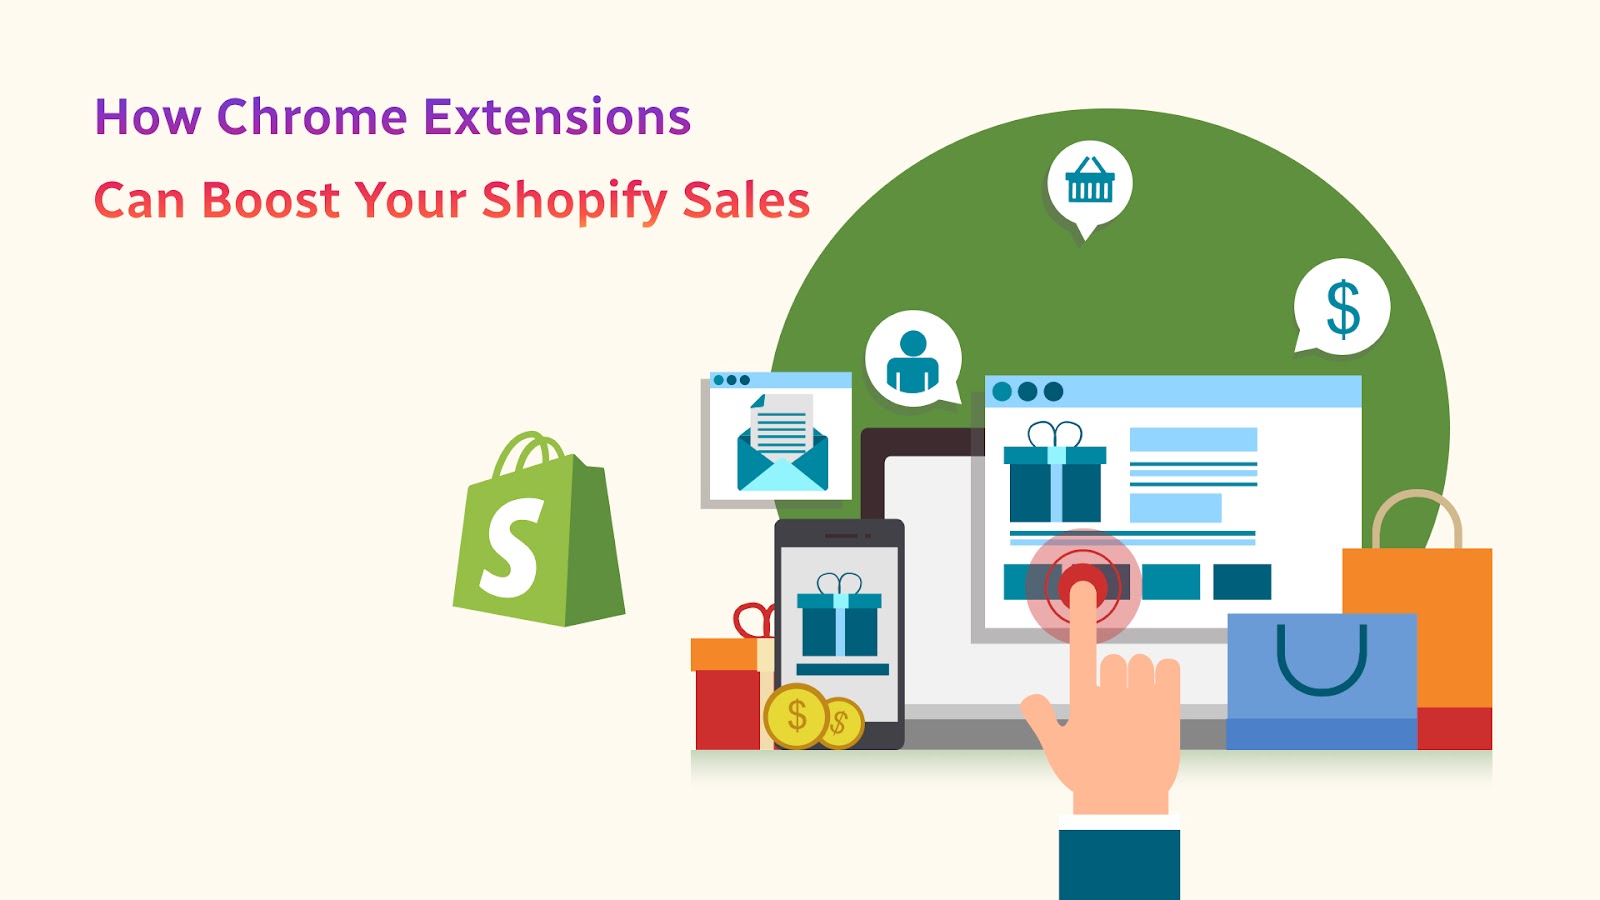 How Chrome Extensions Can Boost Your Shopify Sales